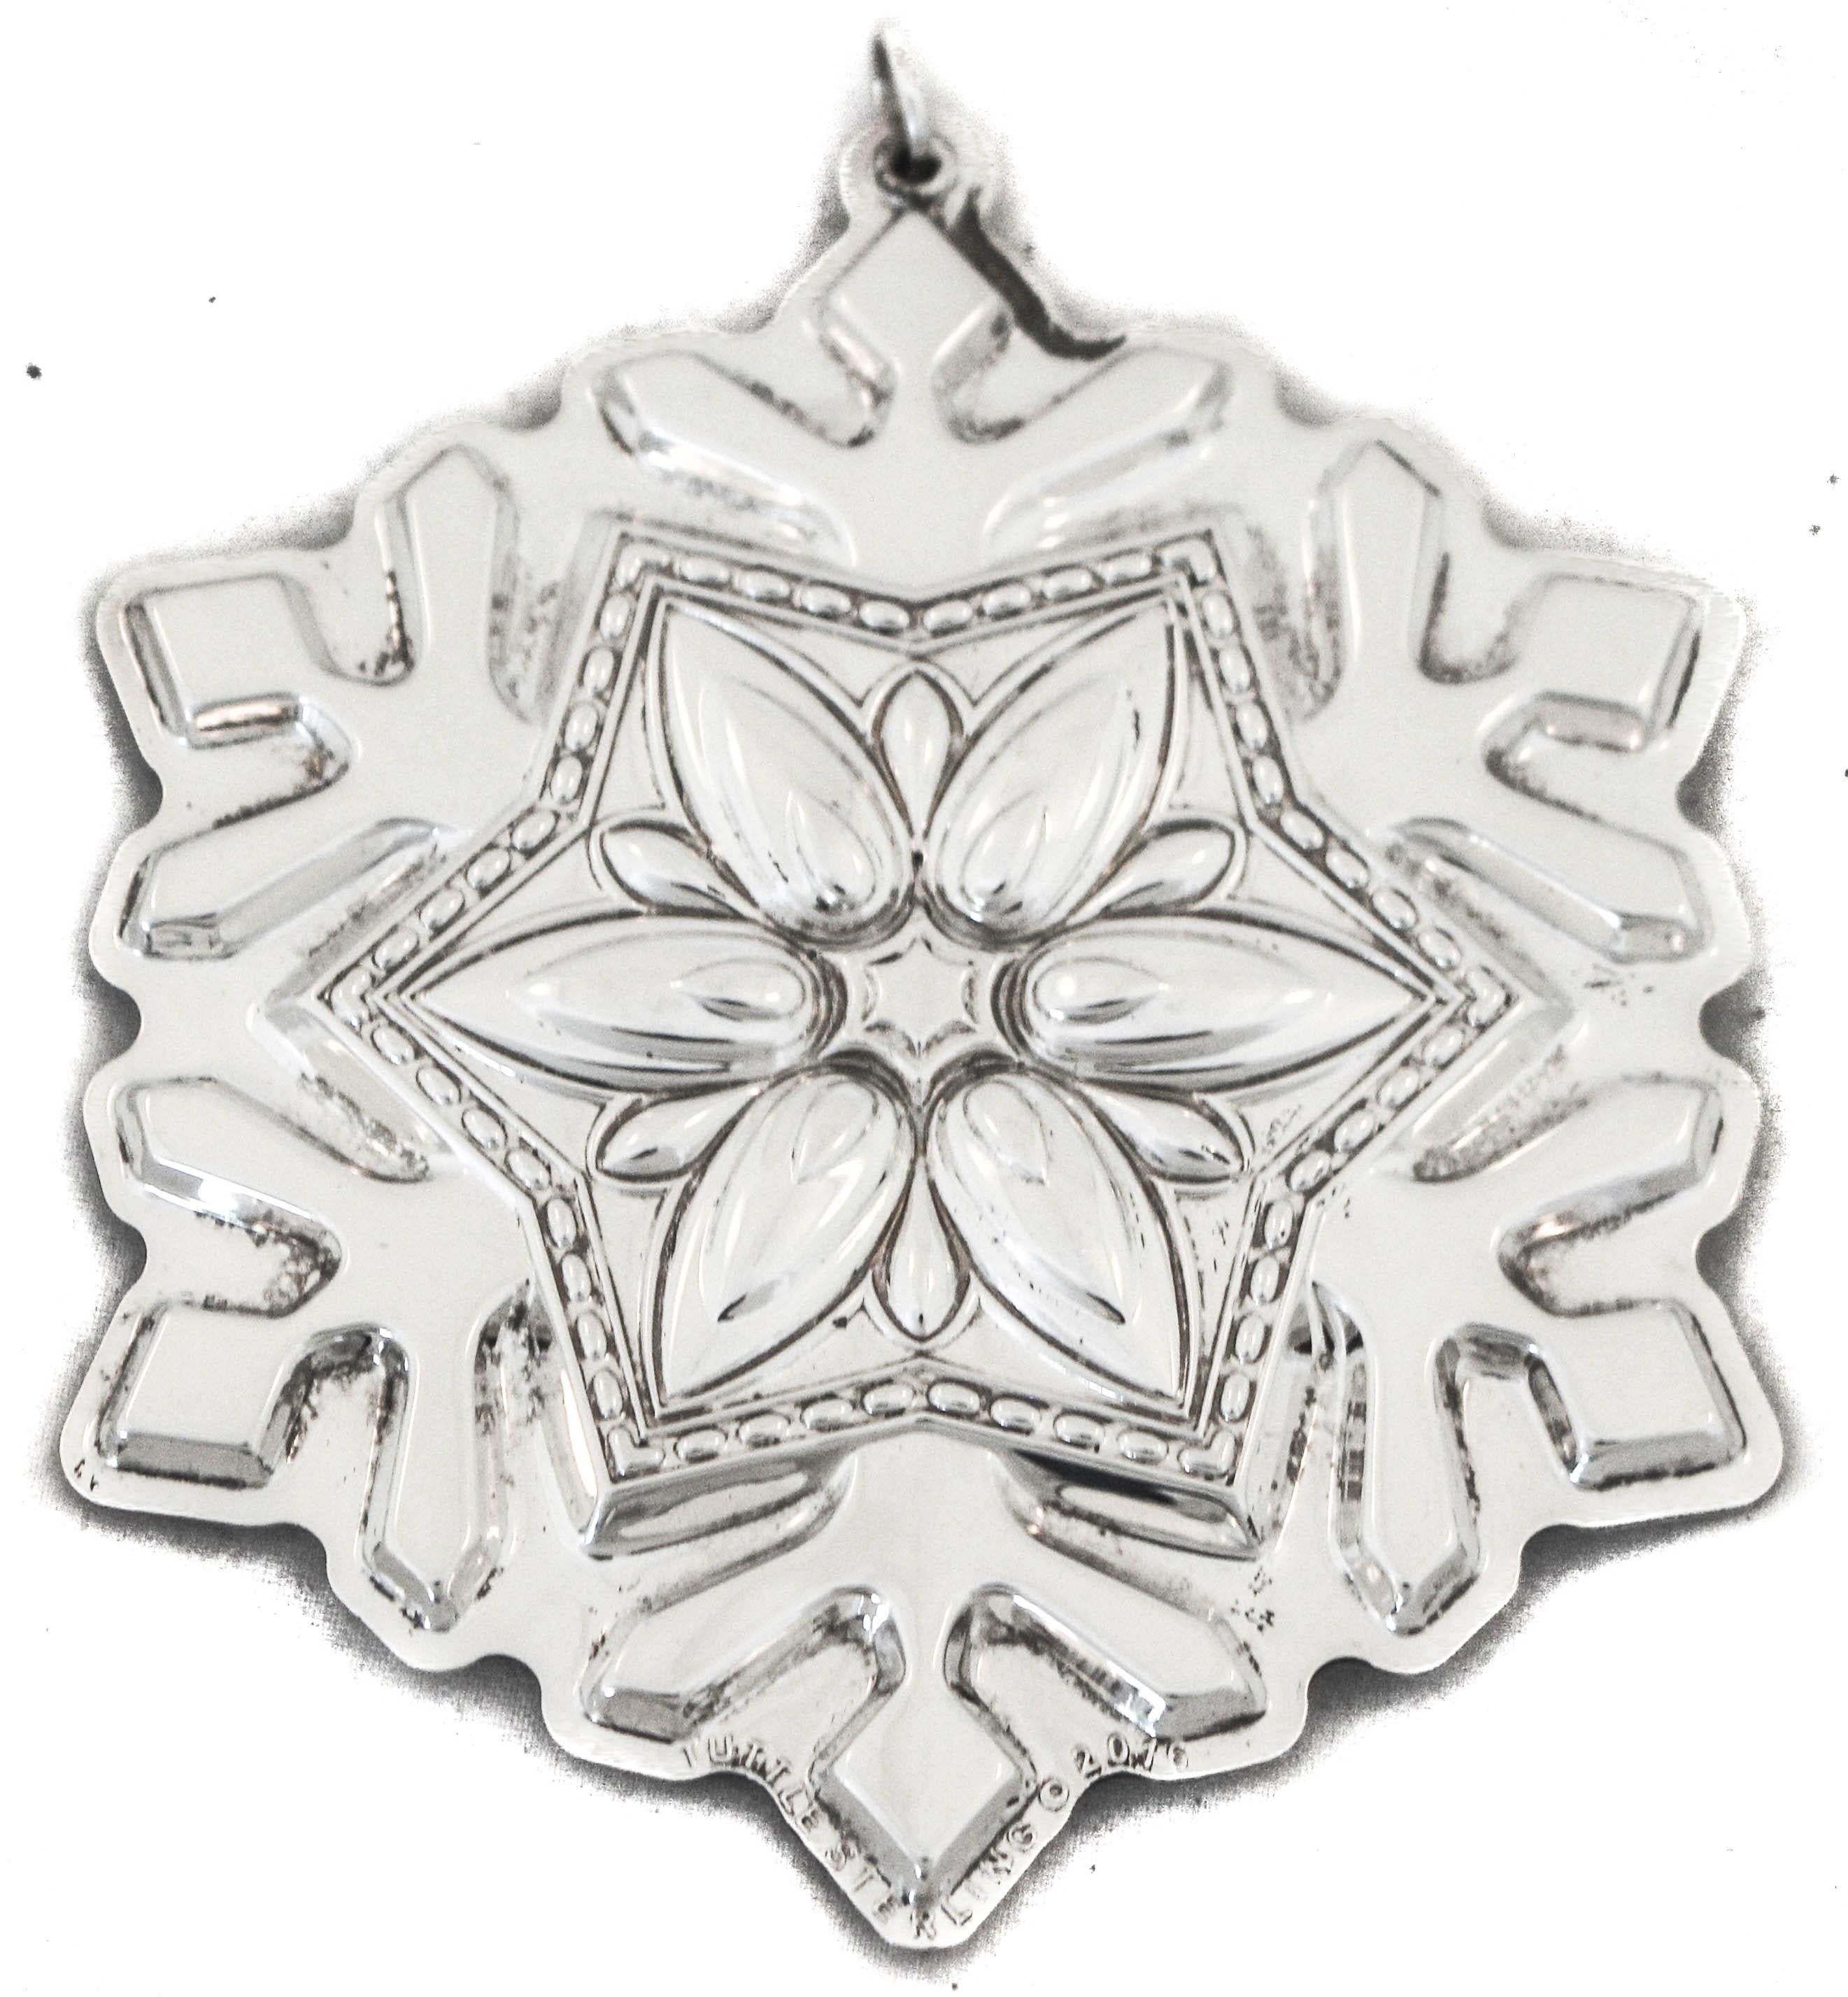 We are happy to offer you this sterling silver Christmas snowflake ornament by the Kirk-Stieff Silver Company of Baltimore, Maryland. 
This snowflake ornament has six points with flowers in the dip of each and a large flower in the center. Both